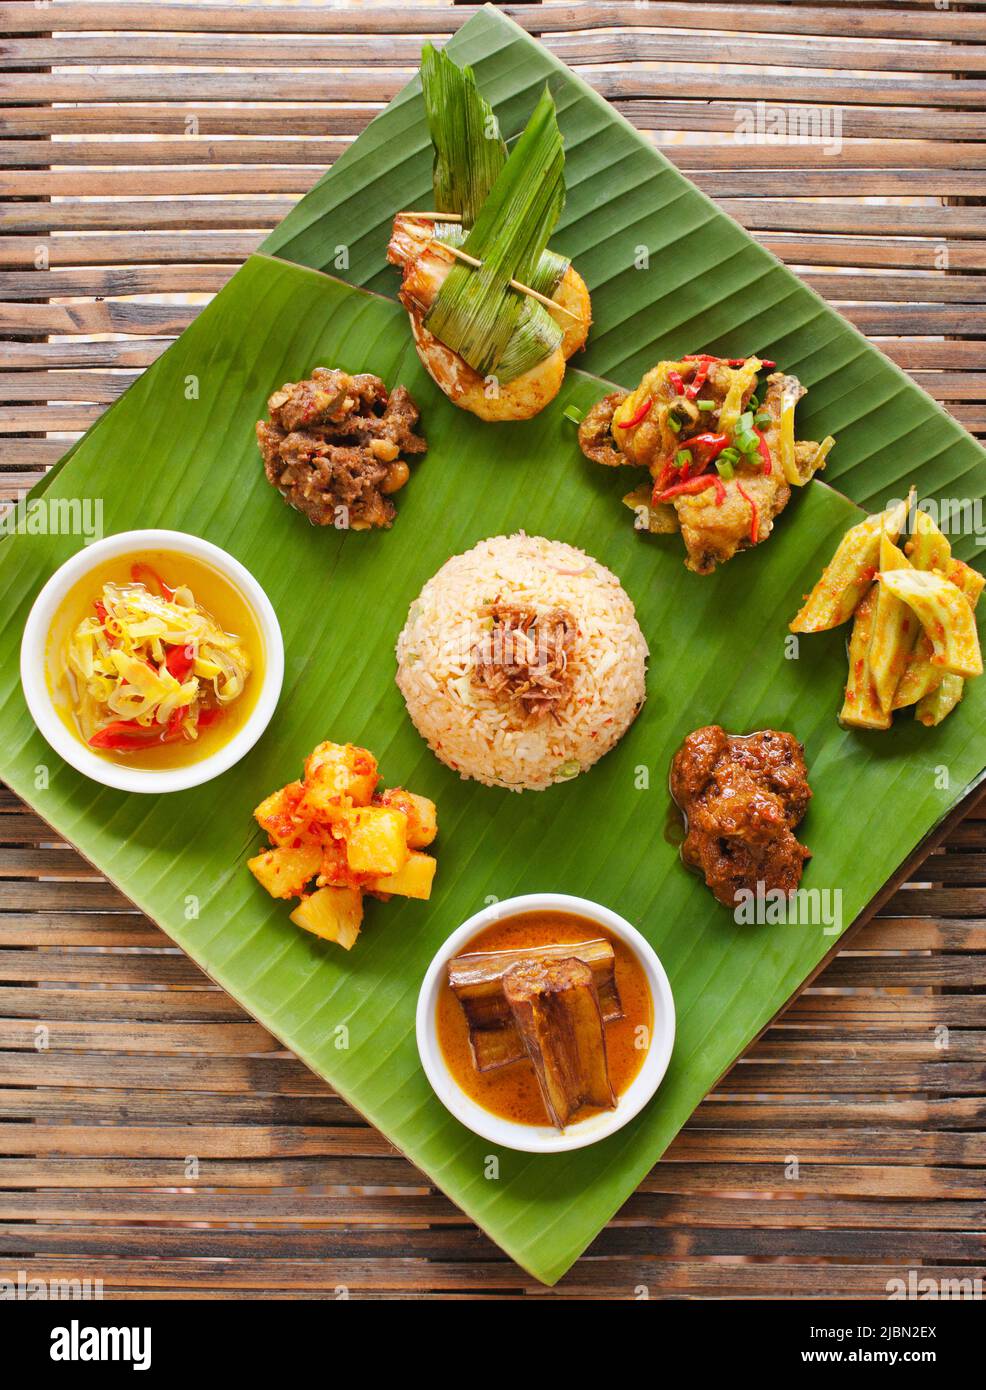 Prawns in Pandan leaf, fish tamarind, beef with peanuts, chicken with lime leaf, pickled lamb curry, ladies finger sambal, pineapple acar, eggplant. Stock Photo